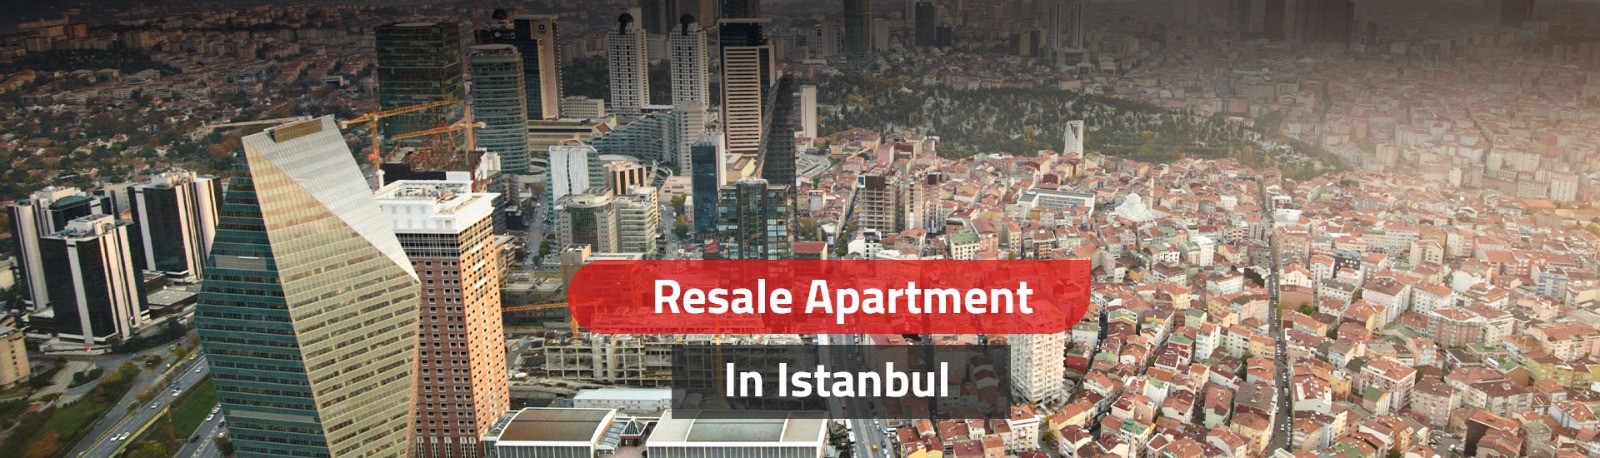 Resale Apartment in Istanbul